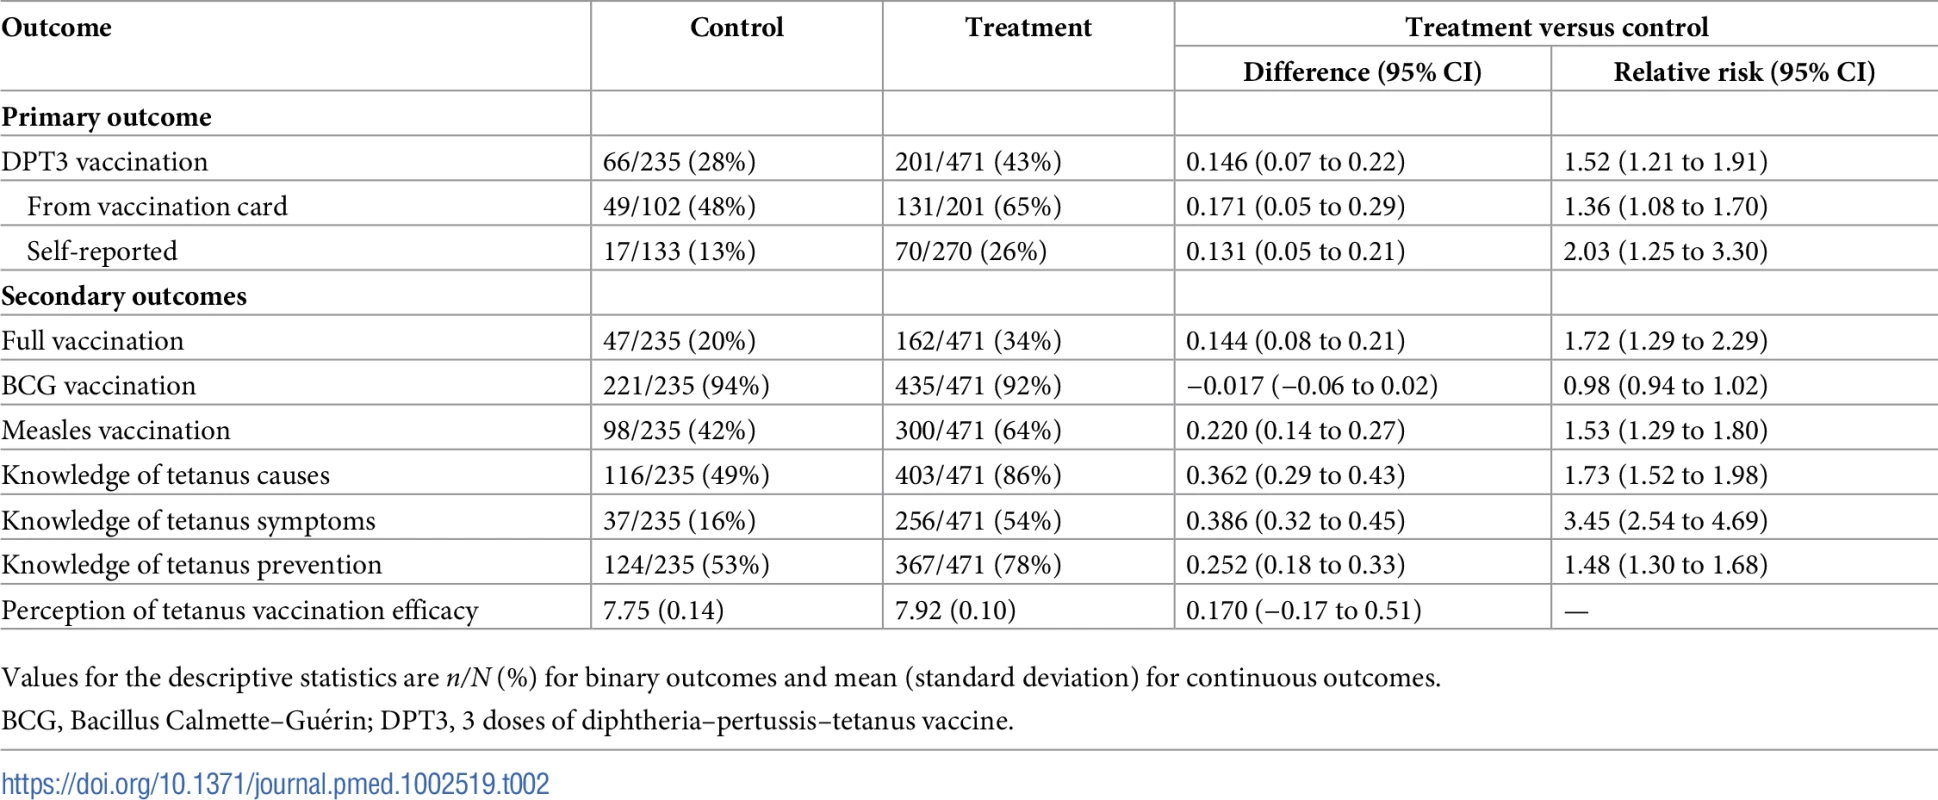 Effect of information on vaccination uptake and other outcomes (pooled analysis).